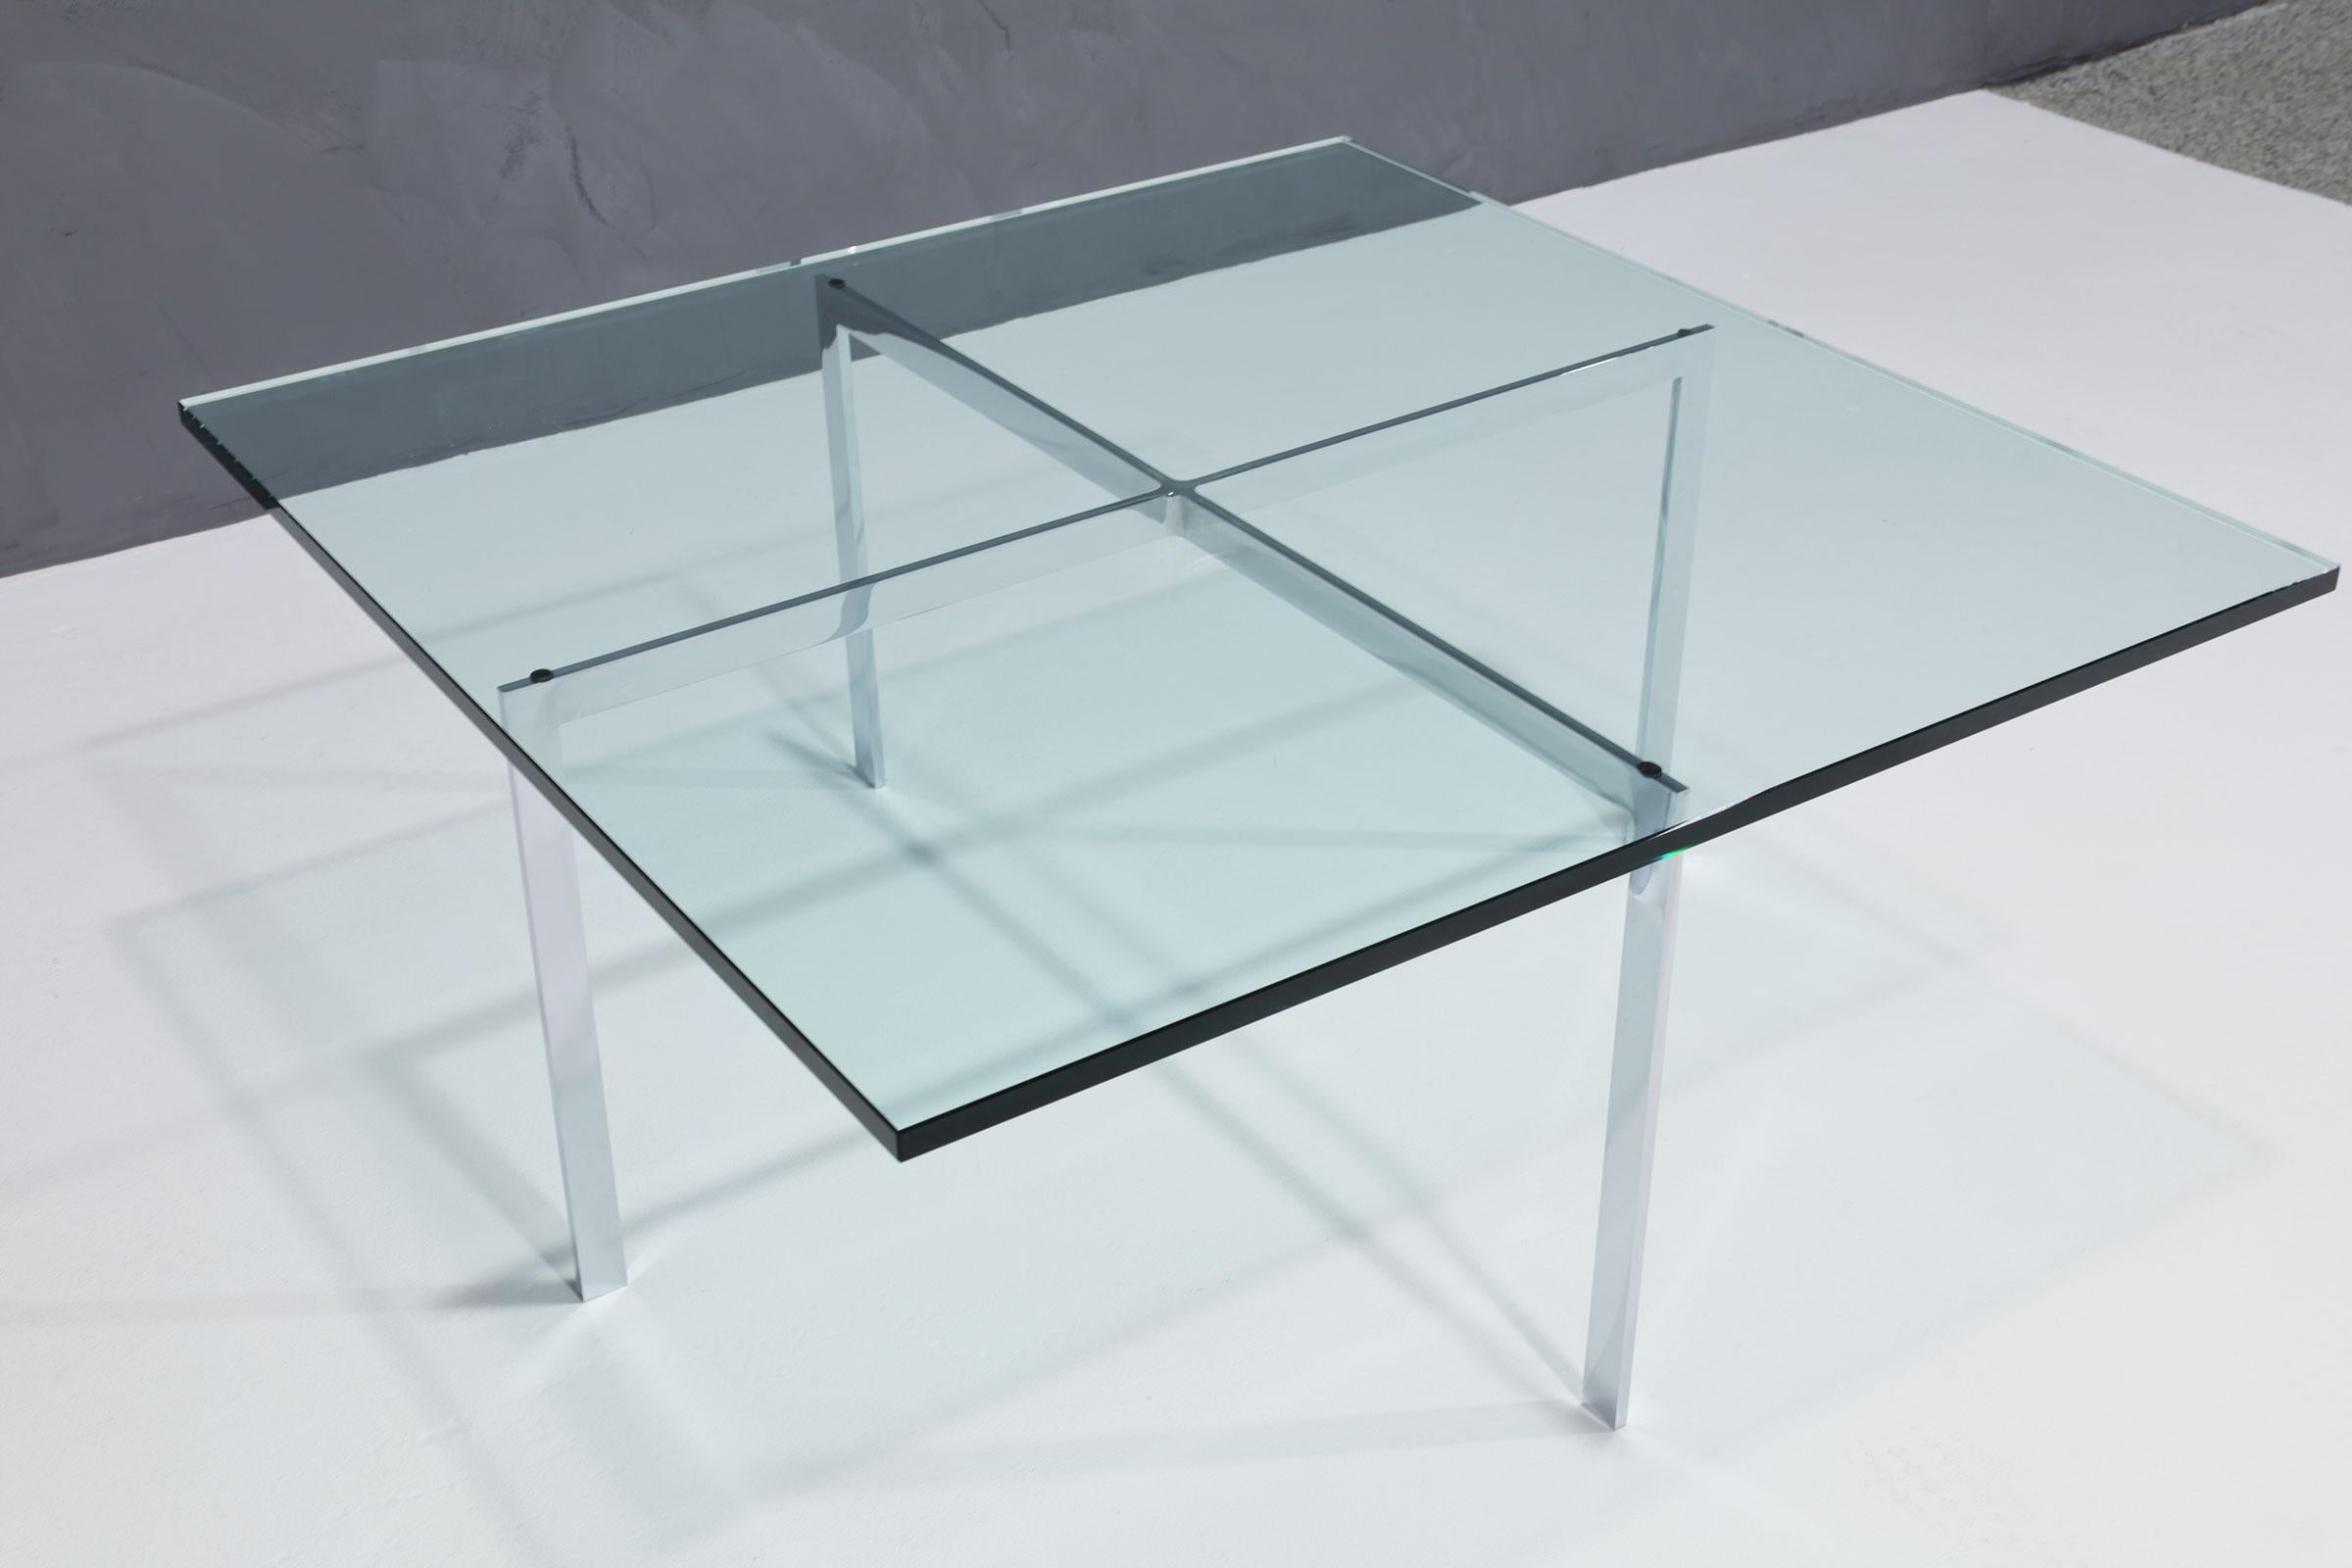 Barcelona coffee table designed by Ludwig Mies van der Rohe and produced by Knoll International. Originally created in 1930 for the Mies-designed Villa Tugendhat in Brno, Czech Republic in 1930. Chromed steel 